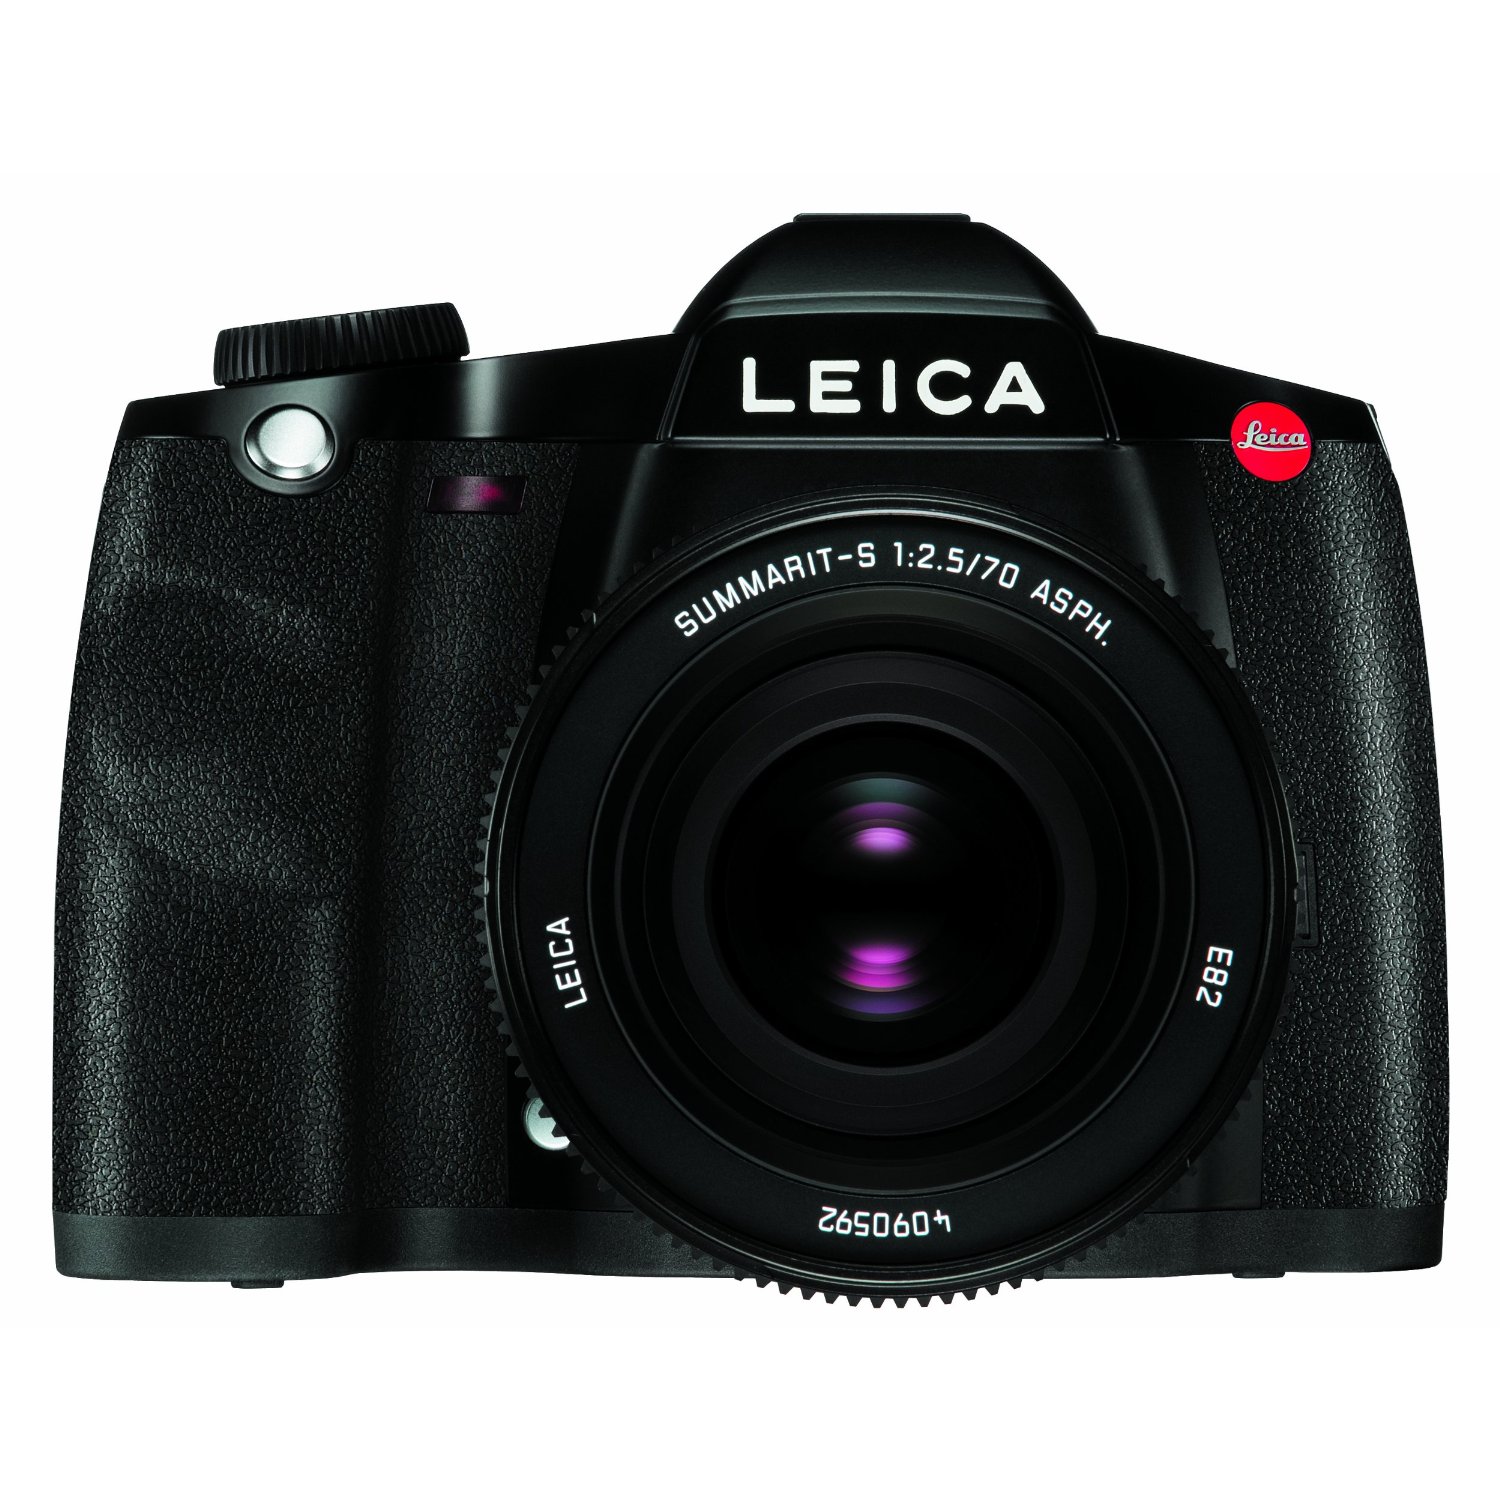 http://thetechjournal.com/wp-content/uploads/images/1109/1316325950-leica-s2-375mp-interchangeable-lens-camera-cost-28000-7.jpg